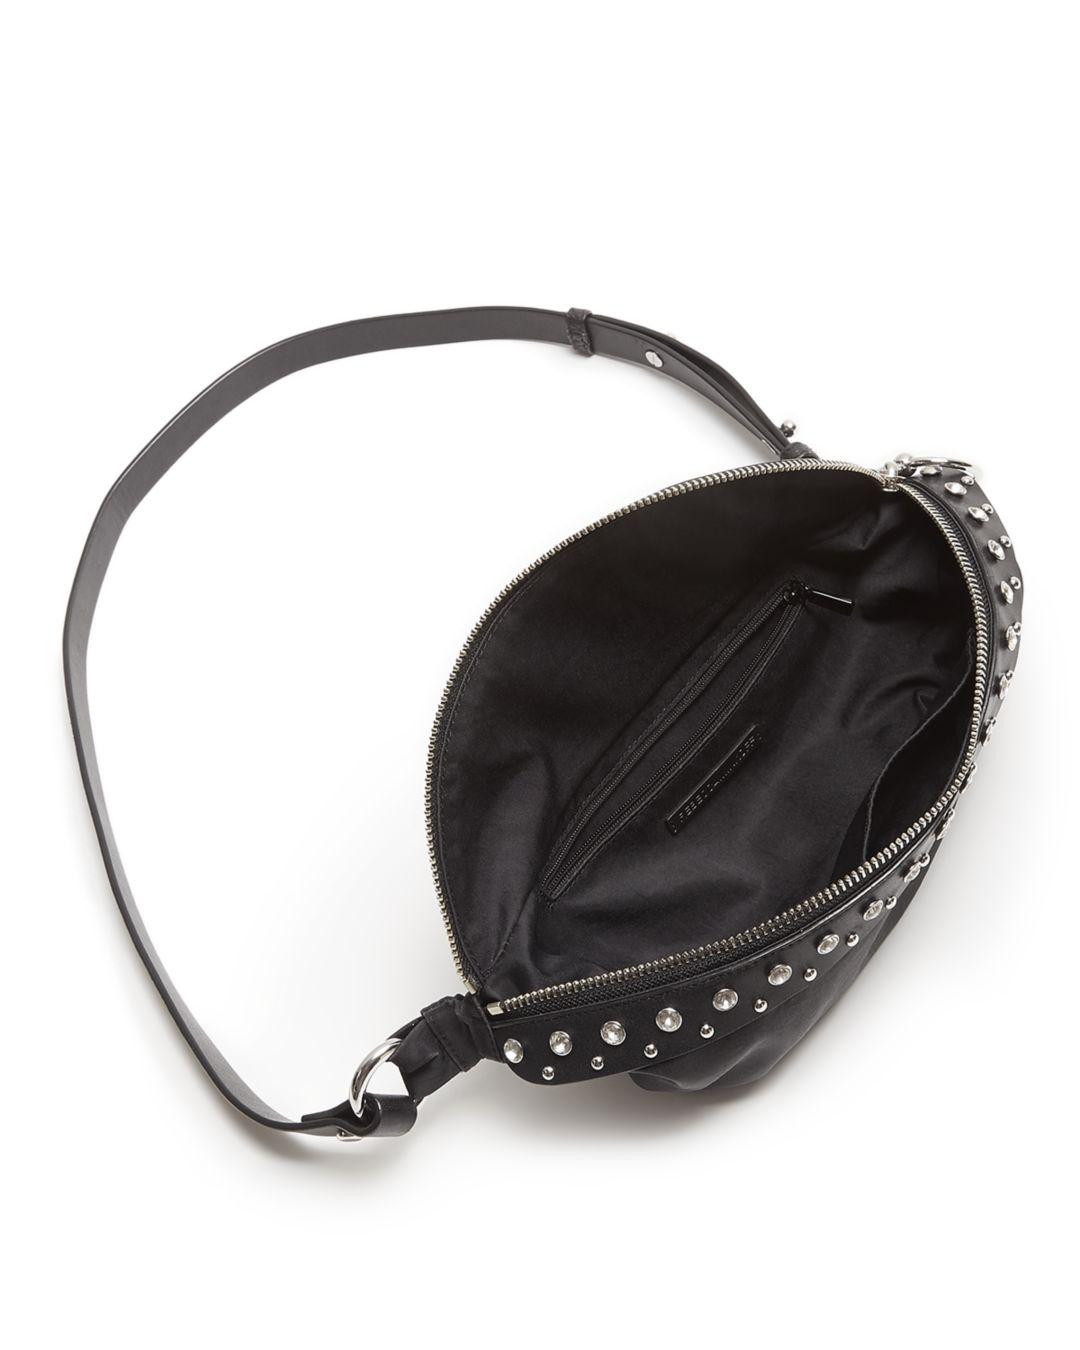 Rebecca Minkoff Synthetic Crystal Studded Nylon & Leather Convertible Belt Bag in Black/Silver ...